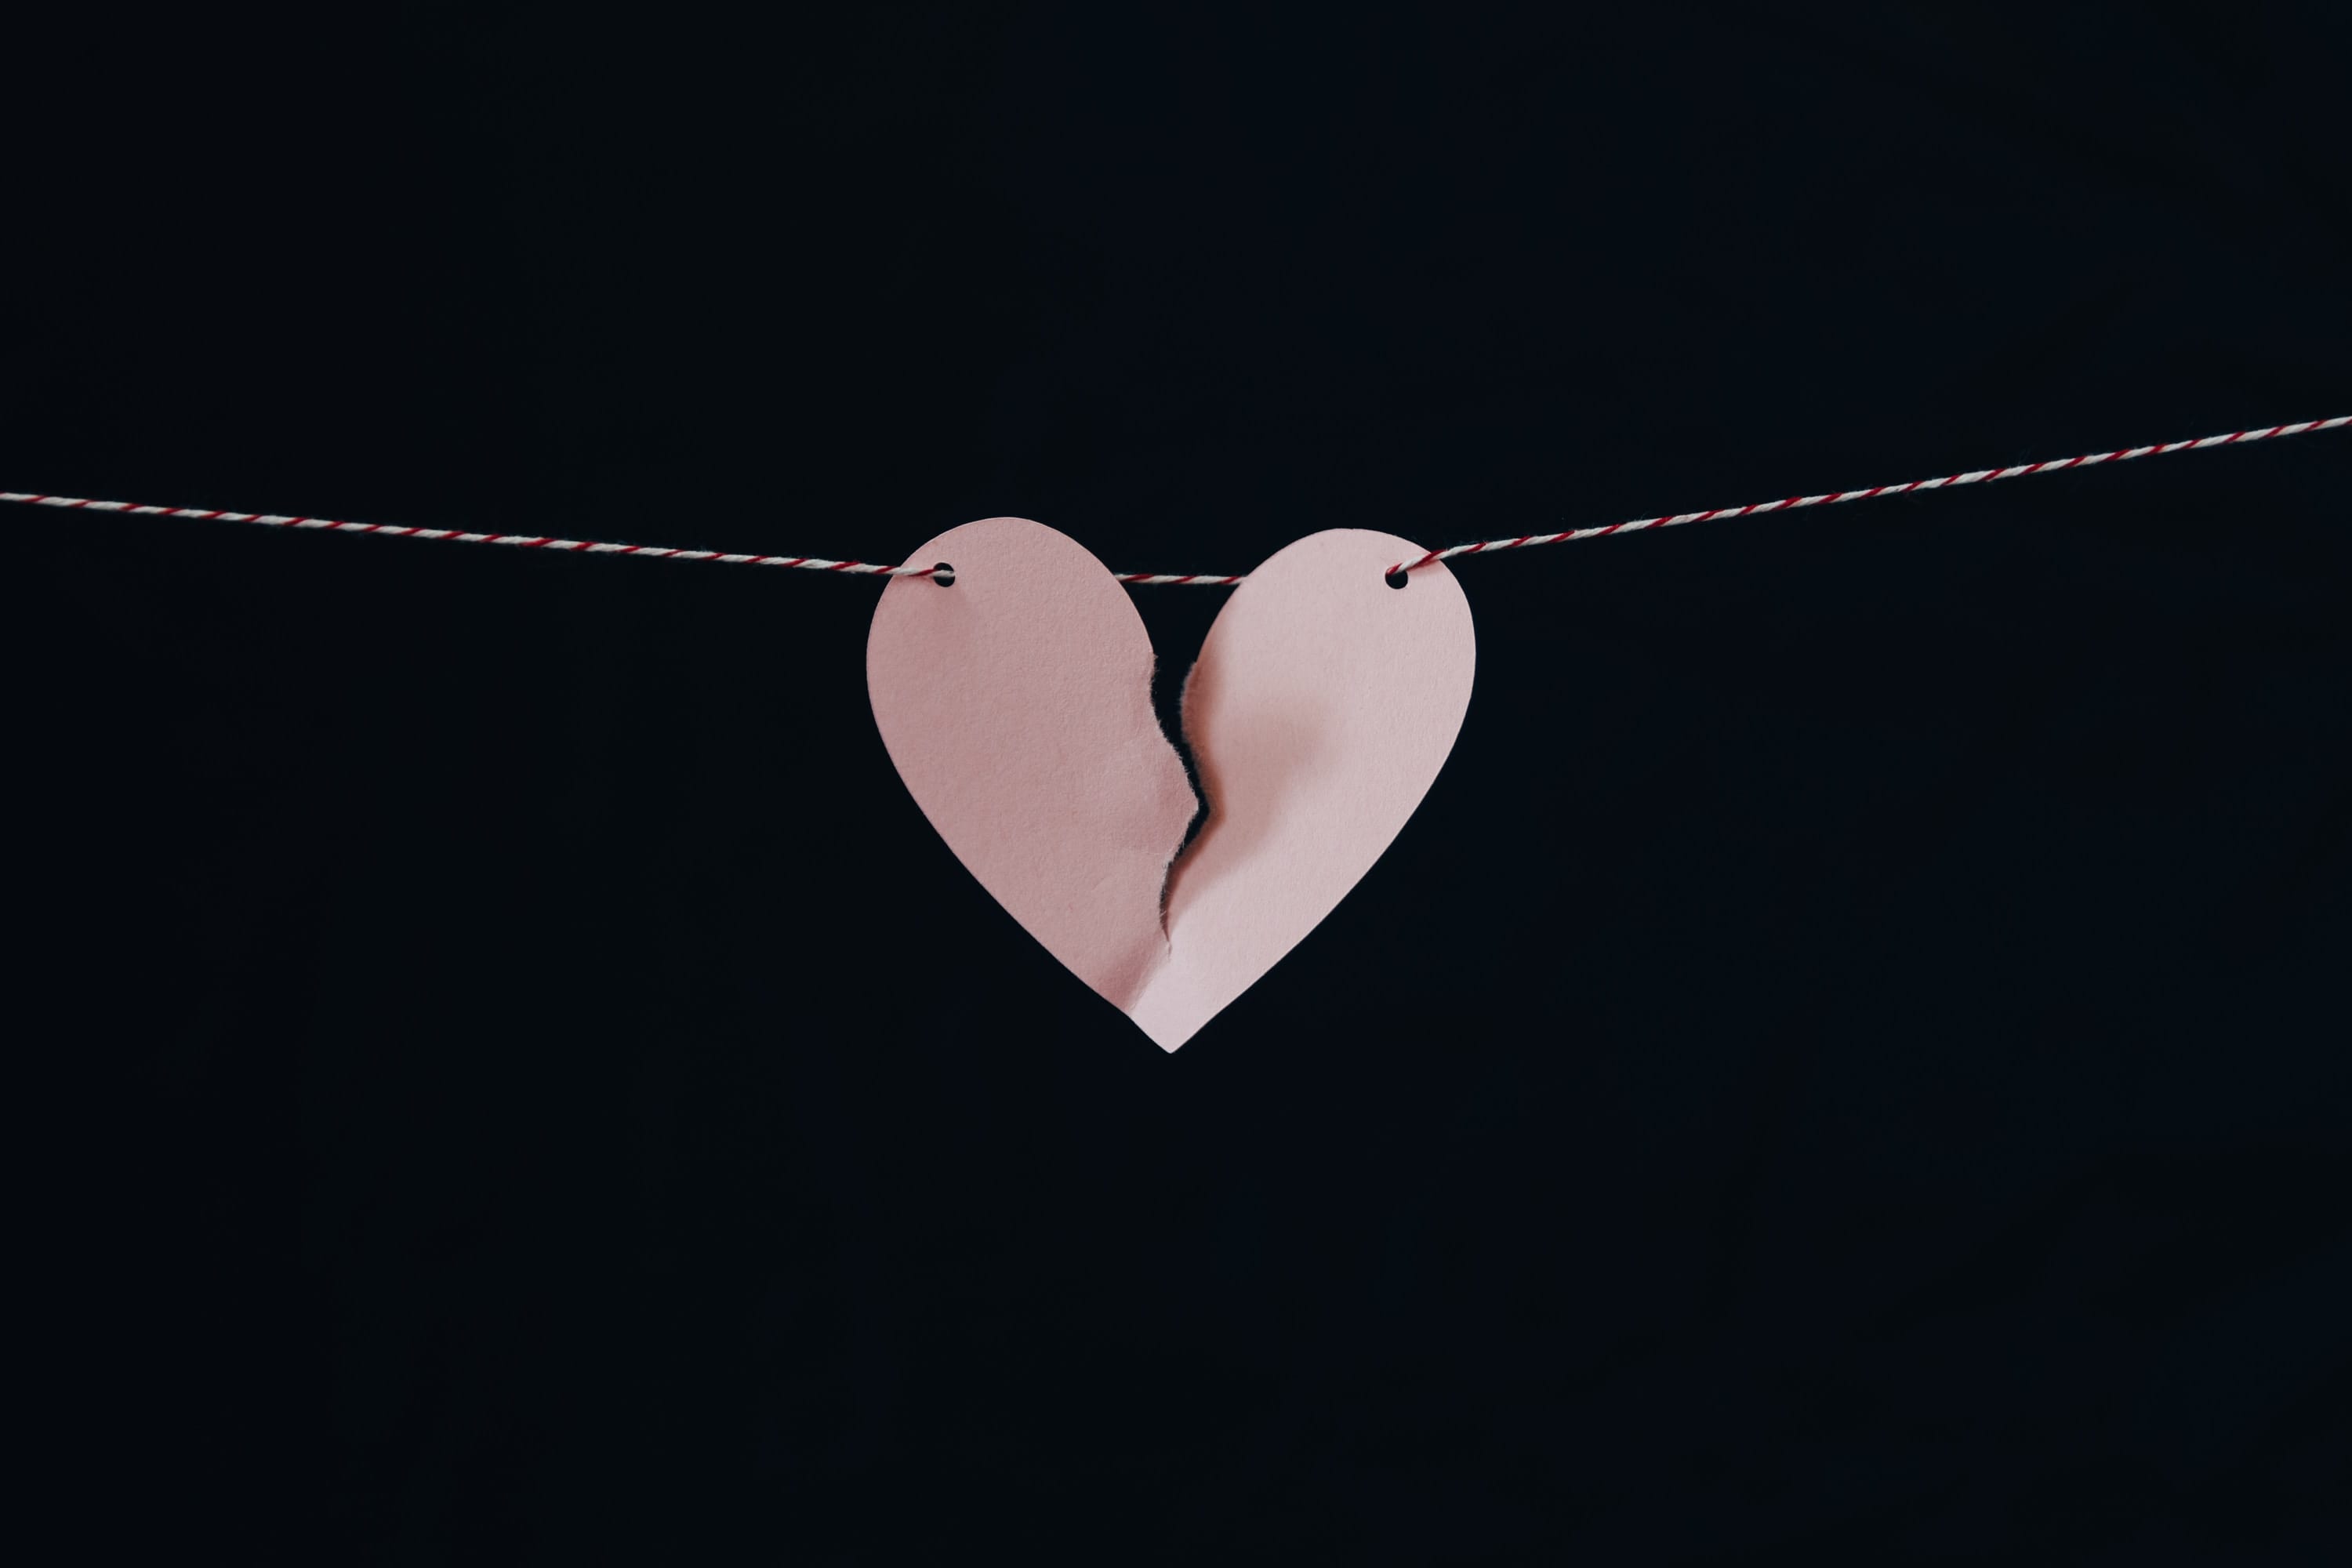 Pink heart on a string, heart torn down the middle; image by Kelly Sikkema, via Unsplash.com.